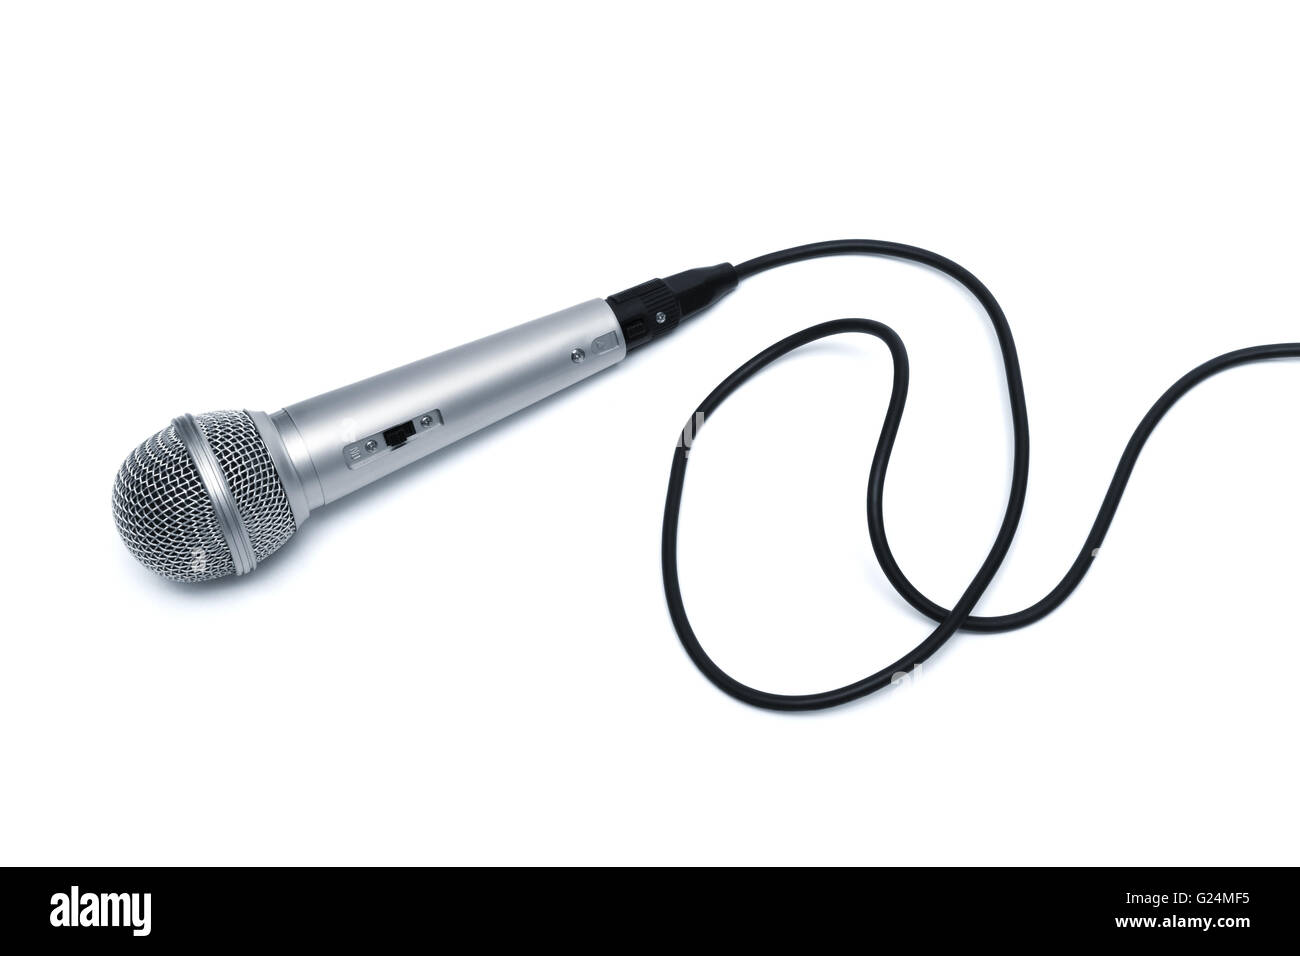 Microphone with a black cord on a white background Stock Photo